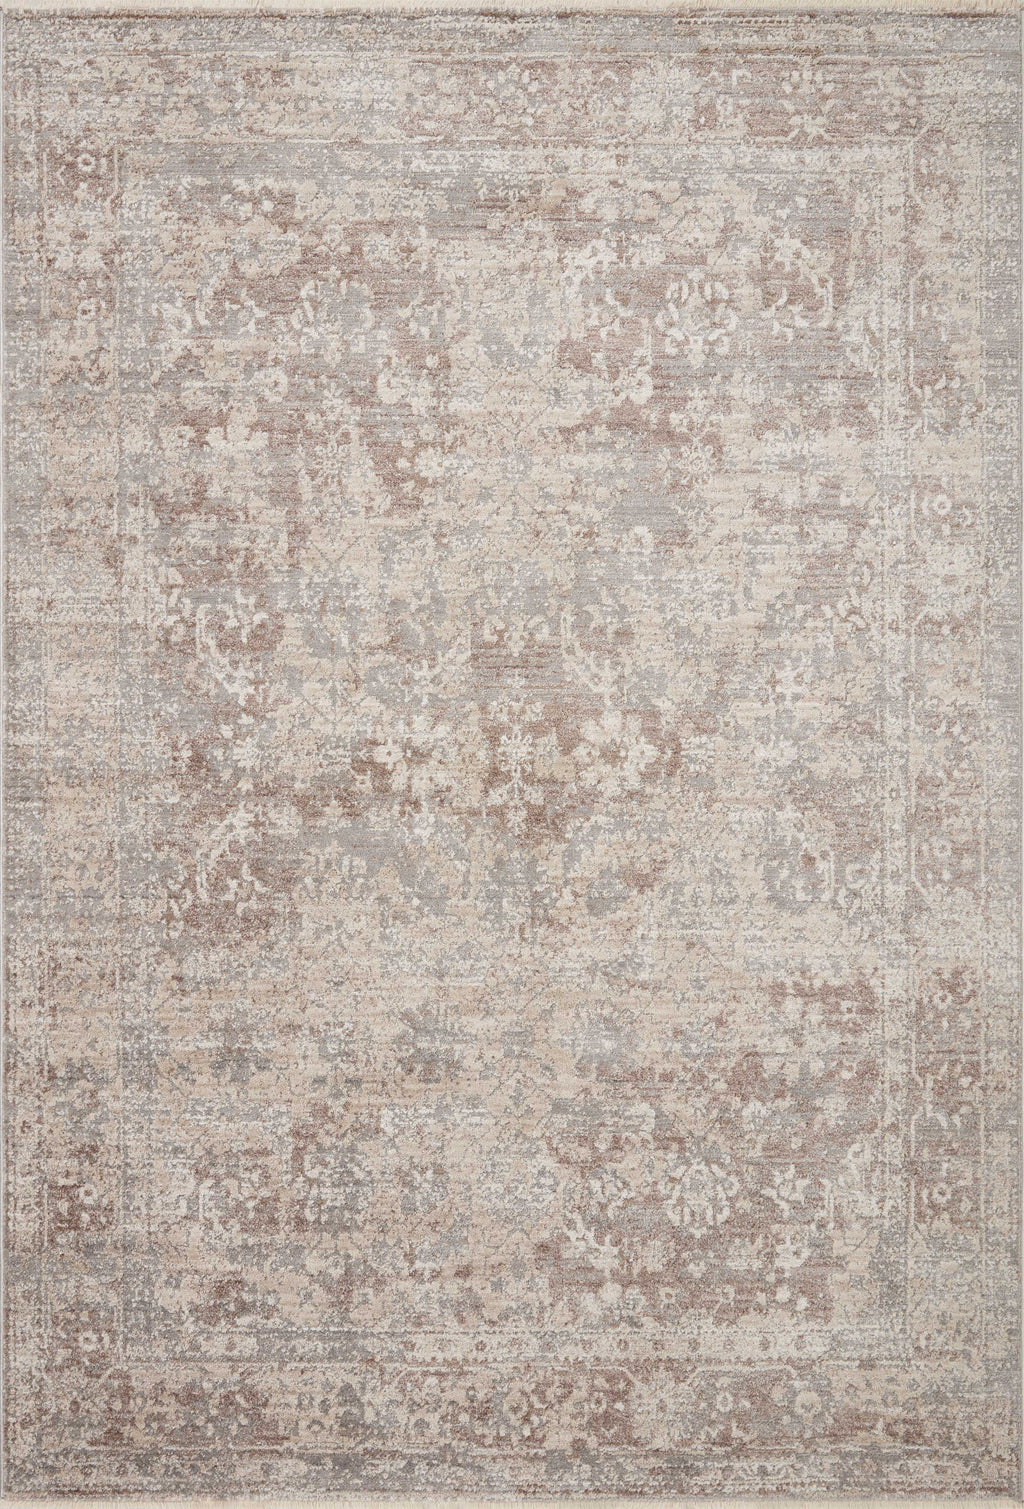 Sonnet Collection Rug in Silver / Natural Gray sample Power-Loomed Polypropylene/Polyester